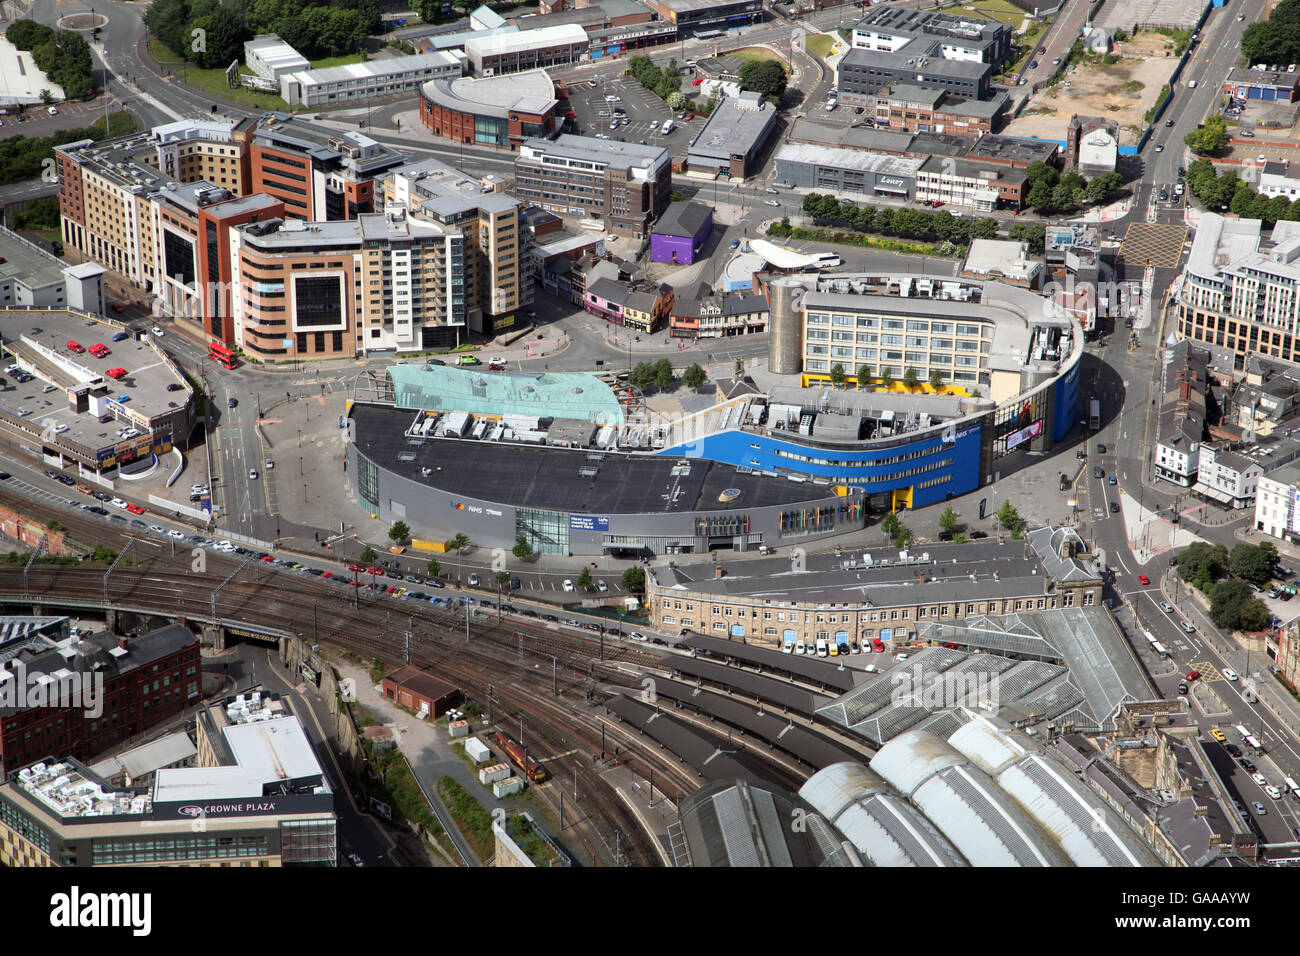 aerial view of the Centre for Life museum of Science in Newcastle, UK Stock Photo